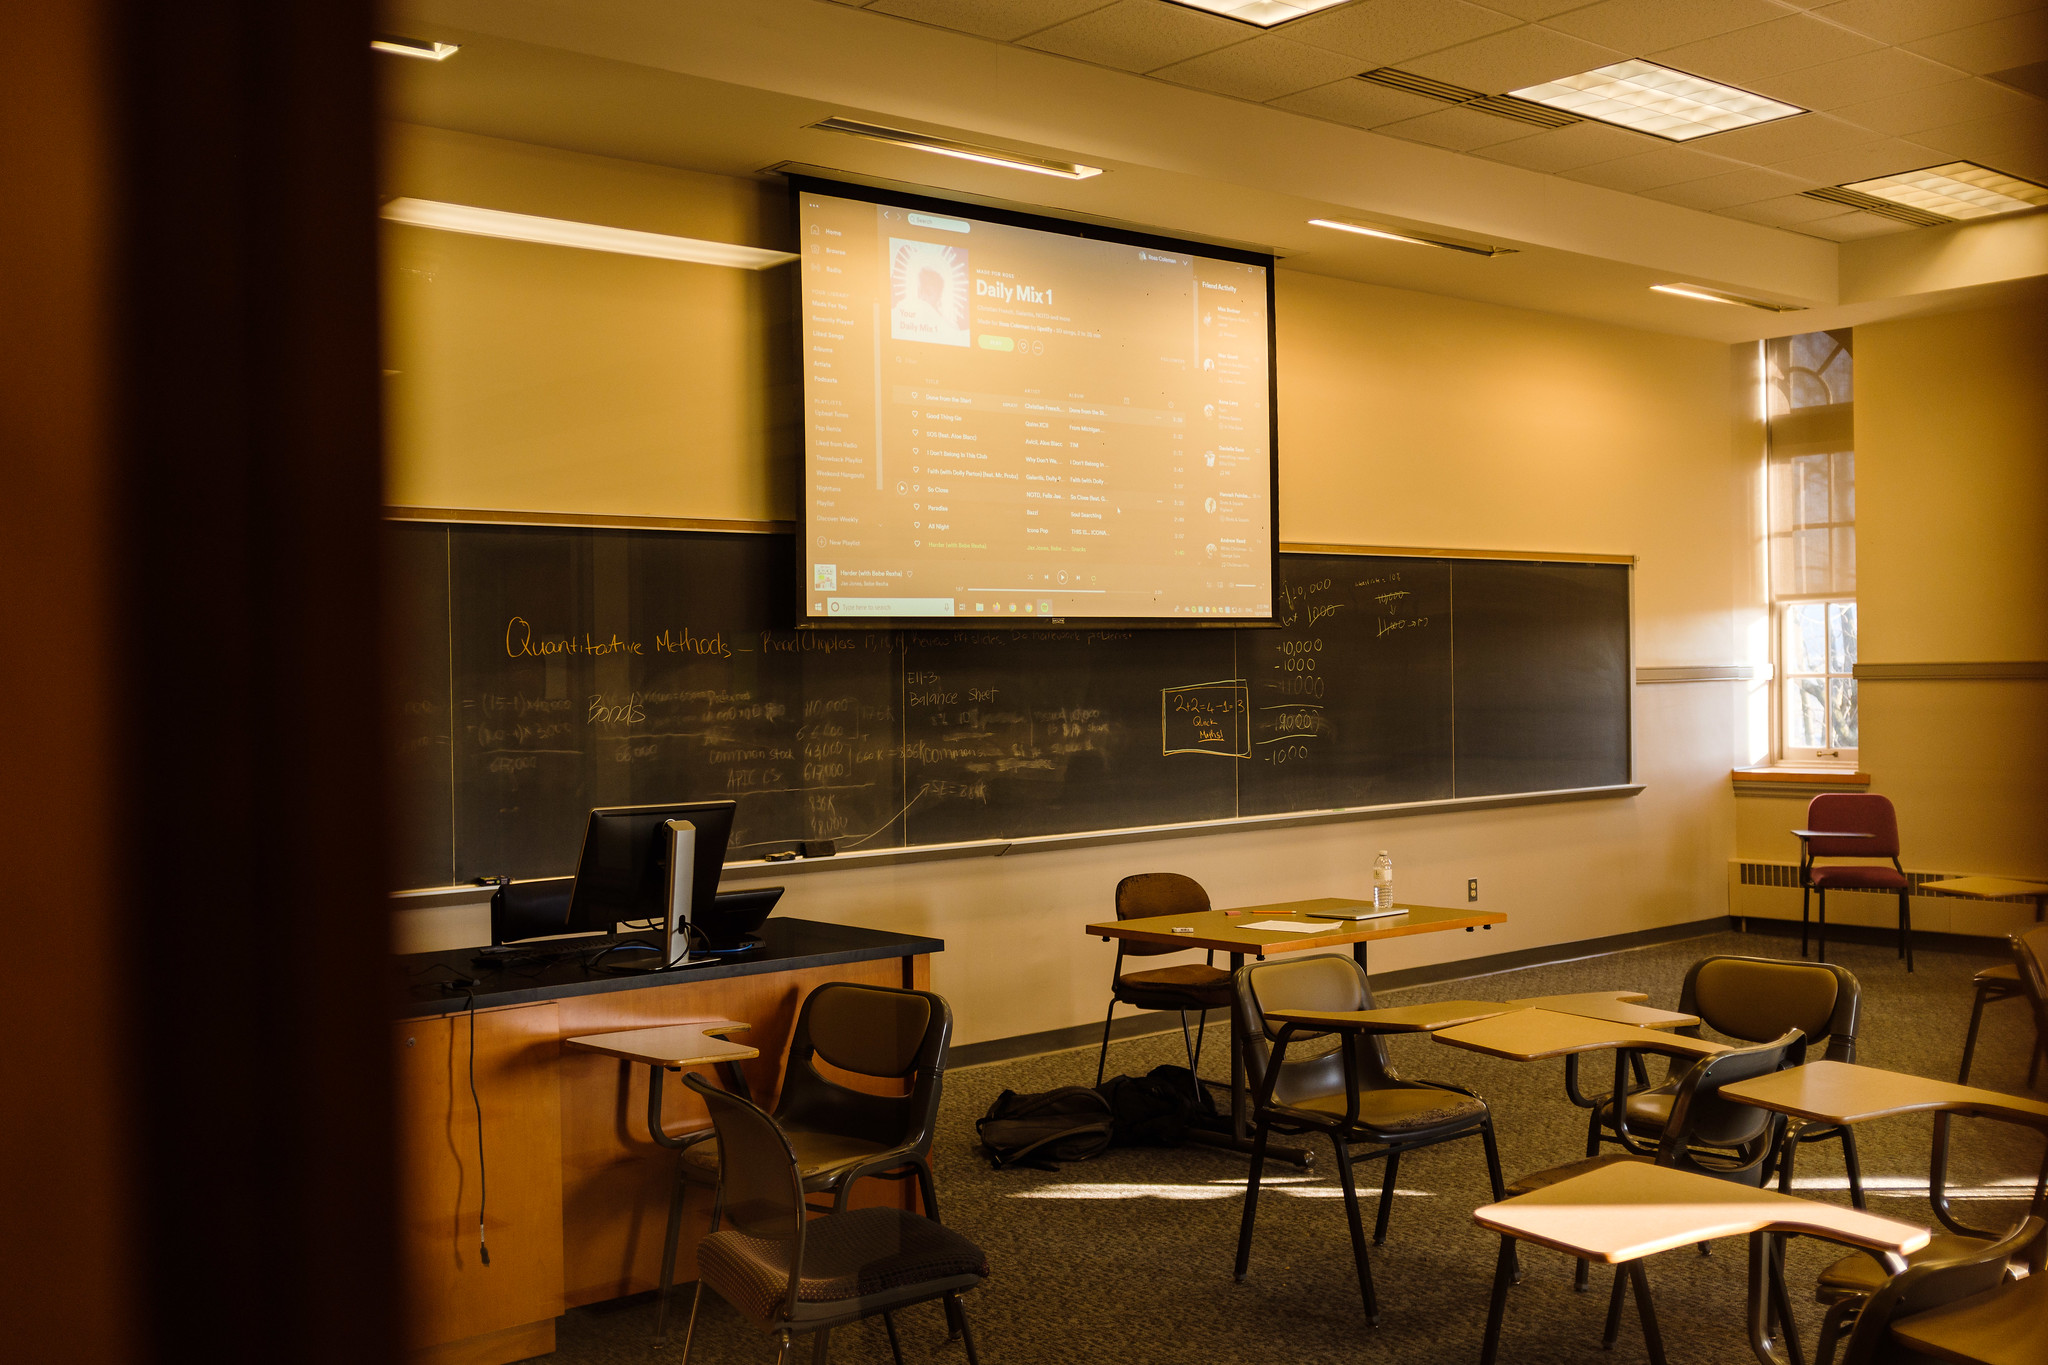 A picture of a classroom